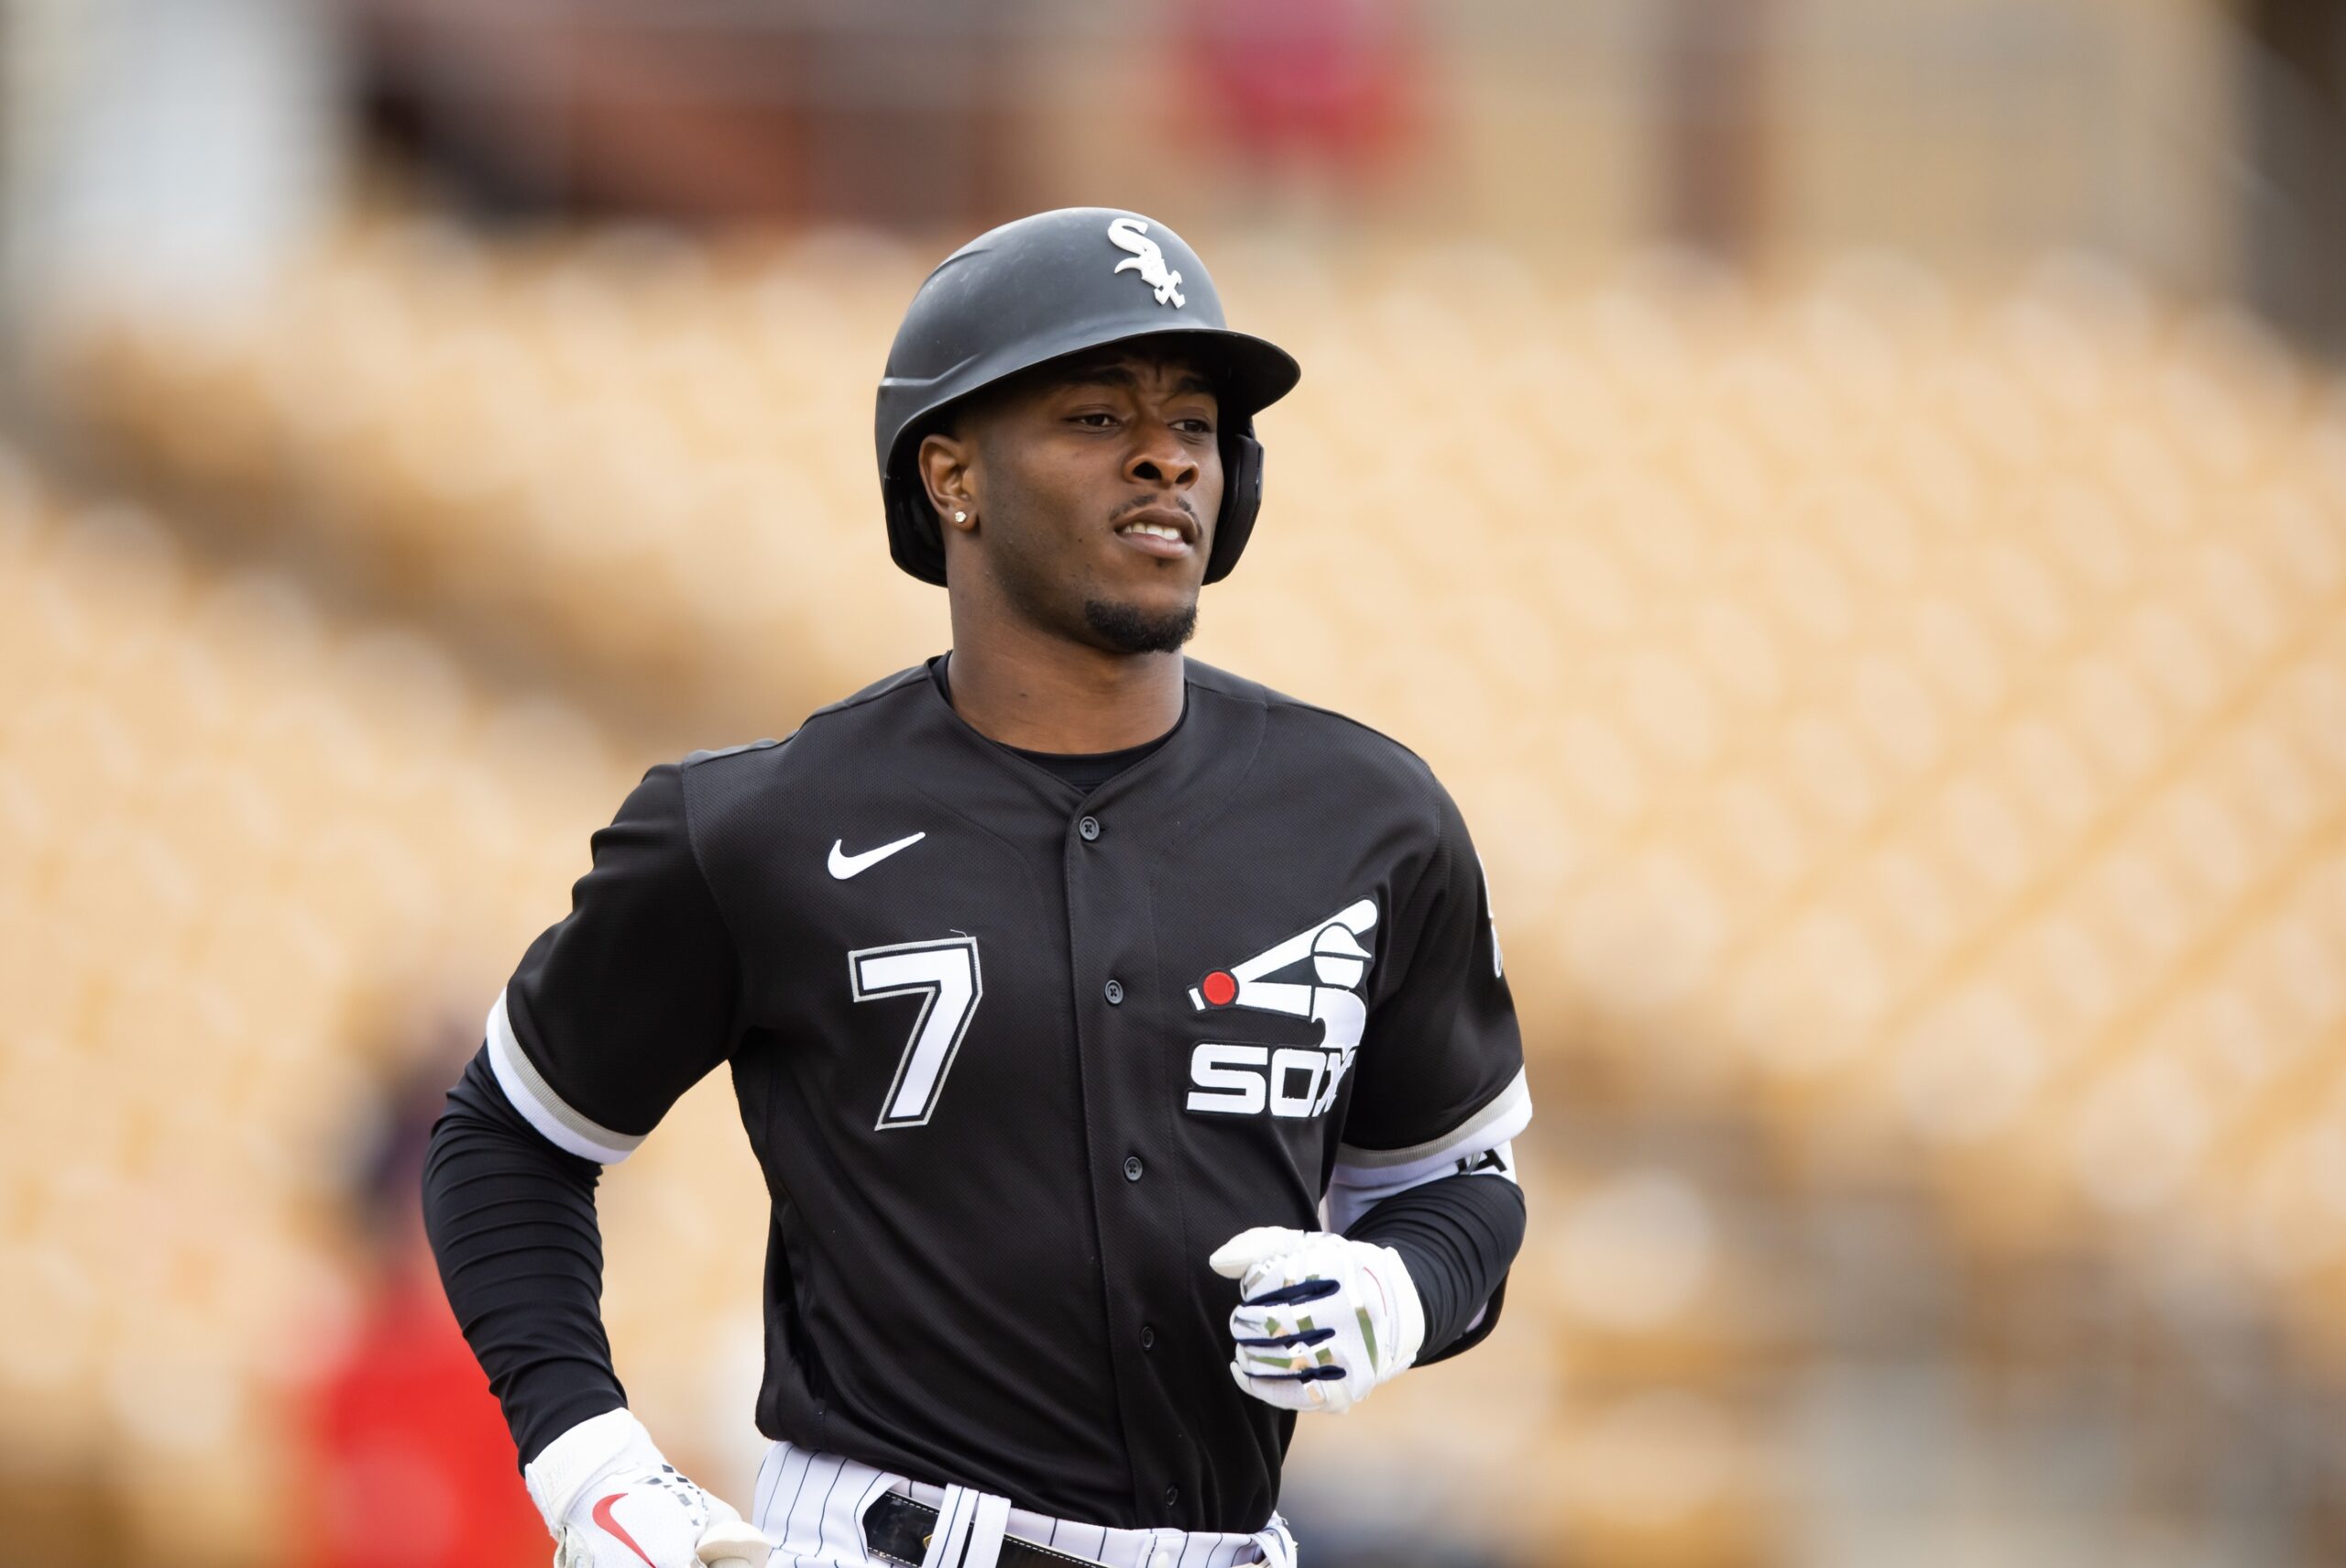 Dodgers Fans Want to See LA Trade for All-Star Shortstop Tim Anderson